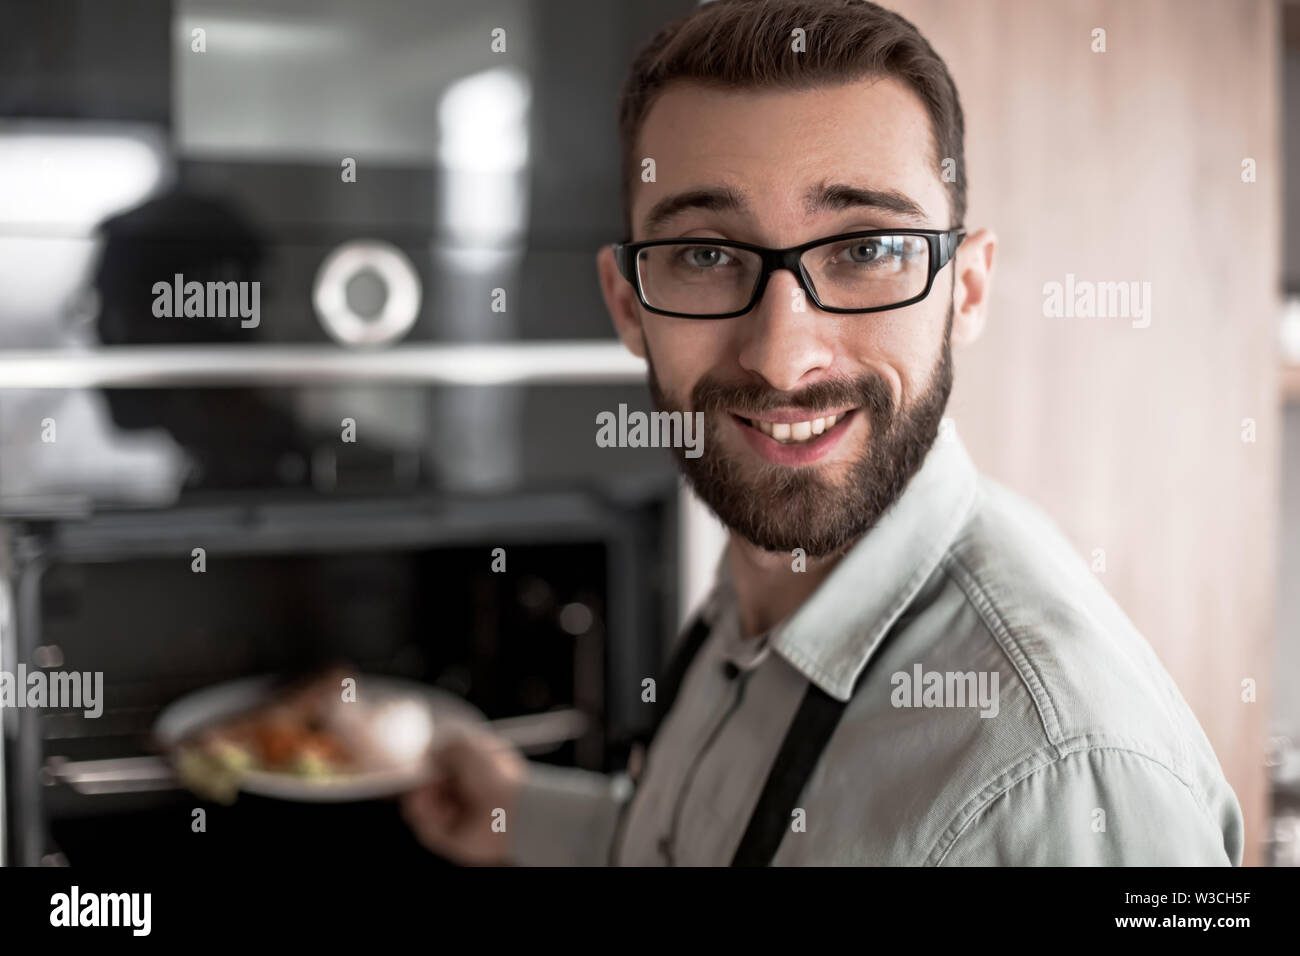 friendly man inviting to Breakfast in his kitchen Stock Photo